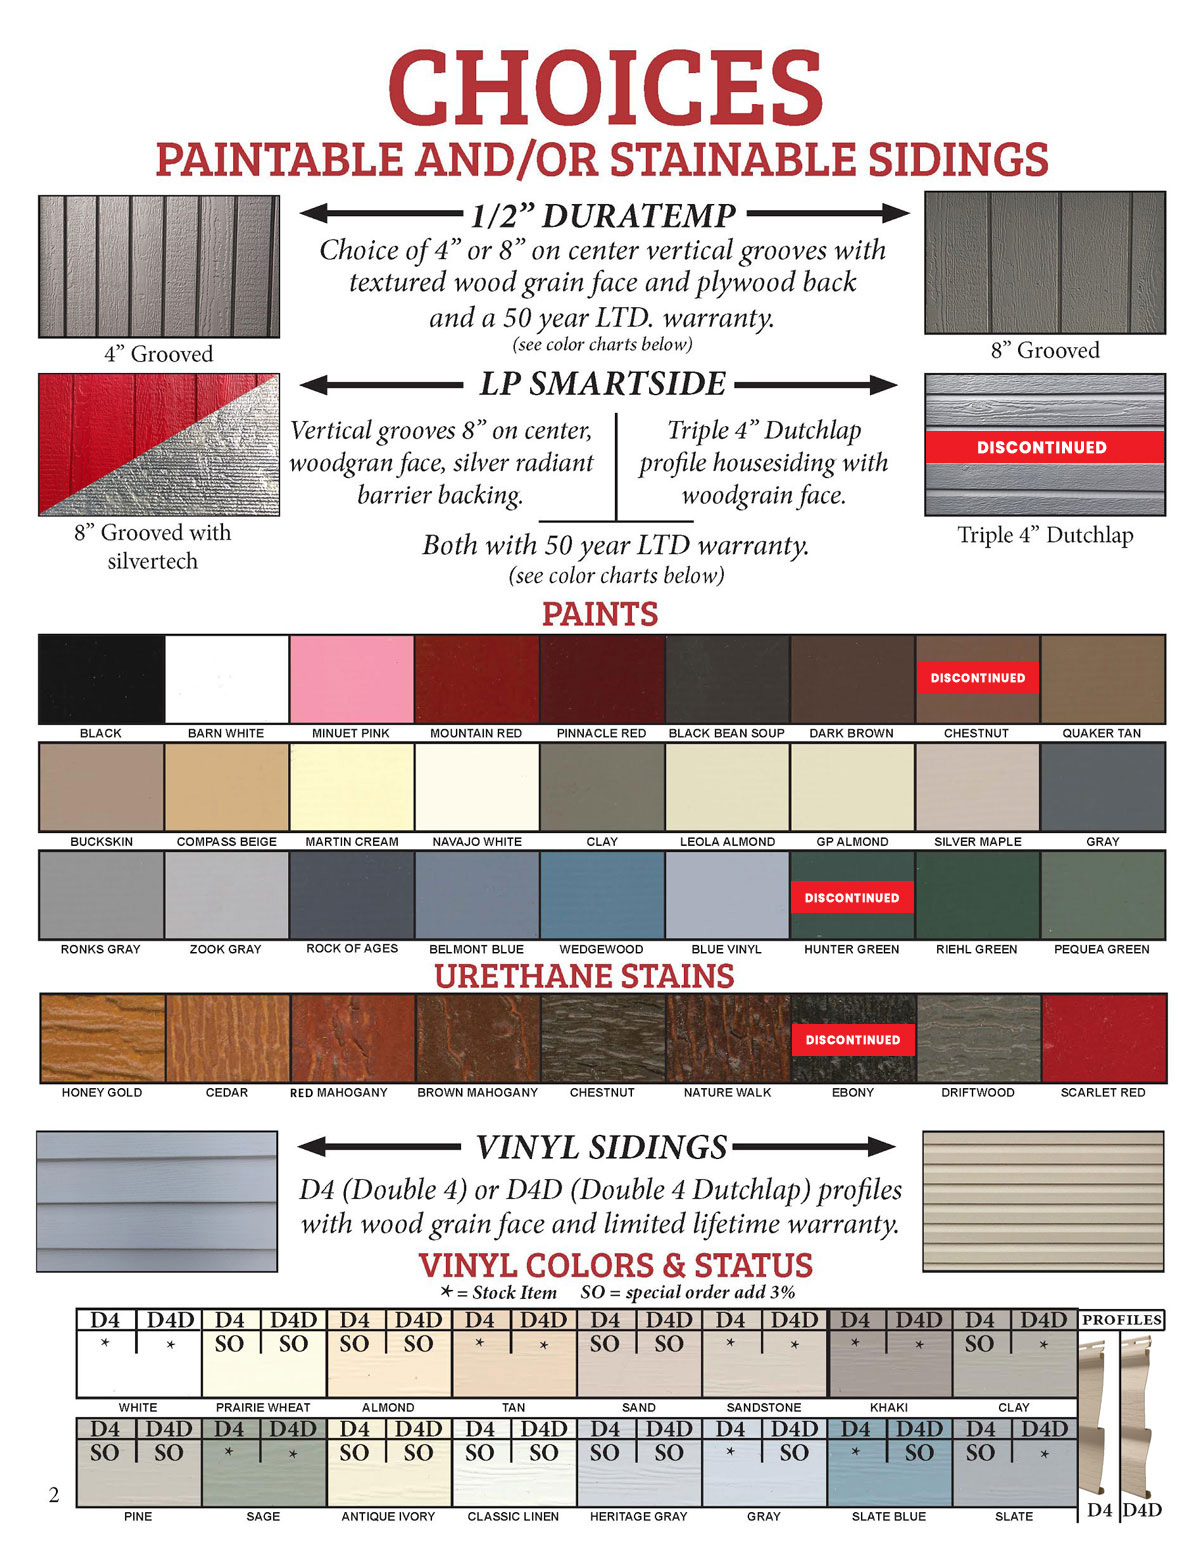 Diagram showing paintable and/or stainable siding options for sheds